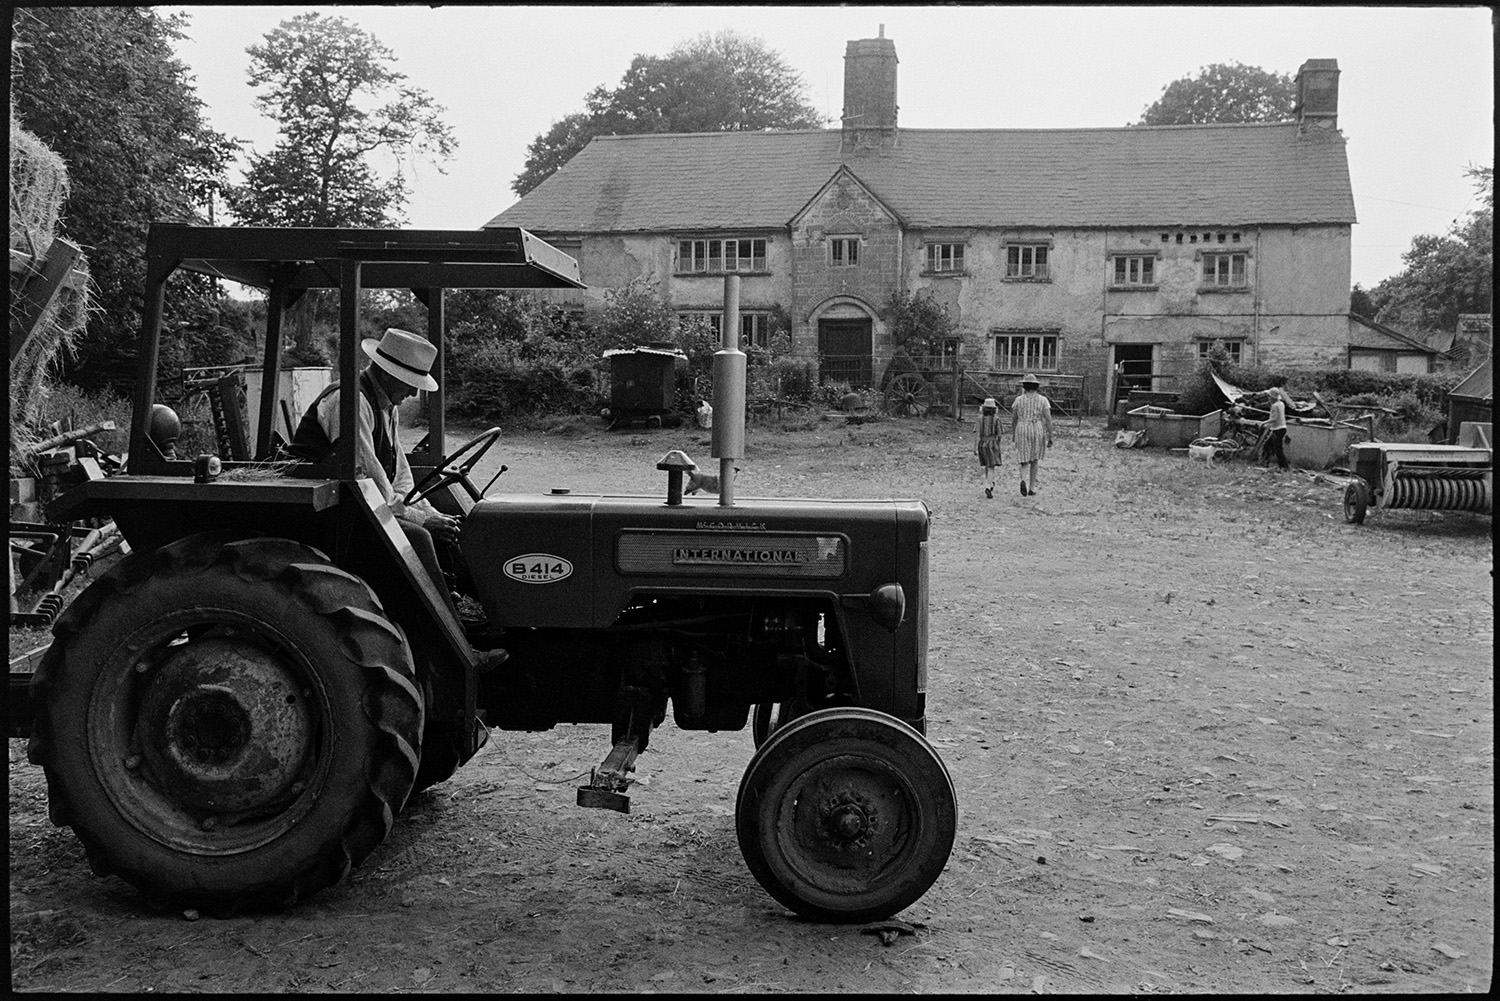 Farming family setting off to bring in the hay on trailer. 
[Mr Oke driving a tractor and trailer with hay bales in the farmyard at Deckport, Hatherleigh. Mrs Oke and her daughter can be seen walking back toward the farmhouse.]